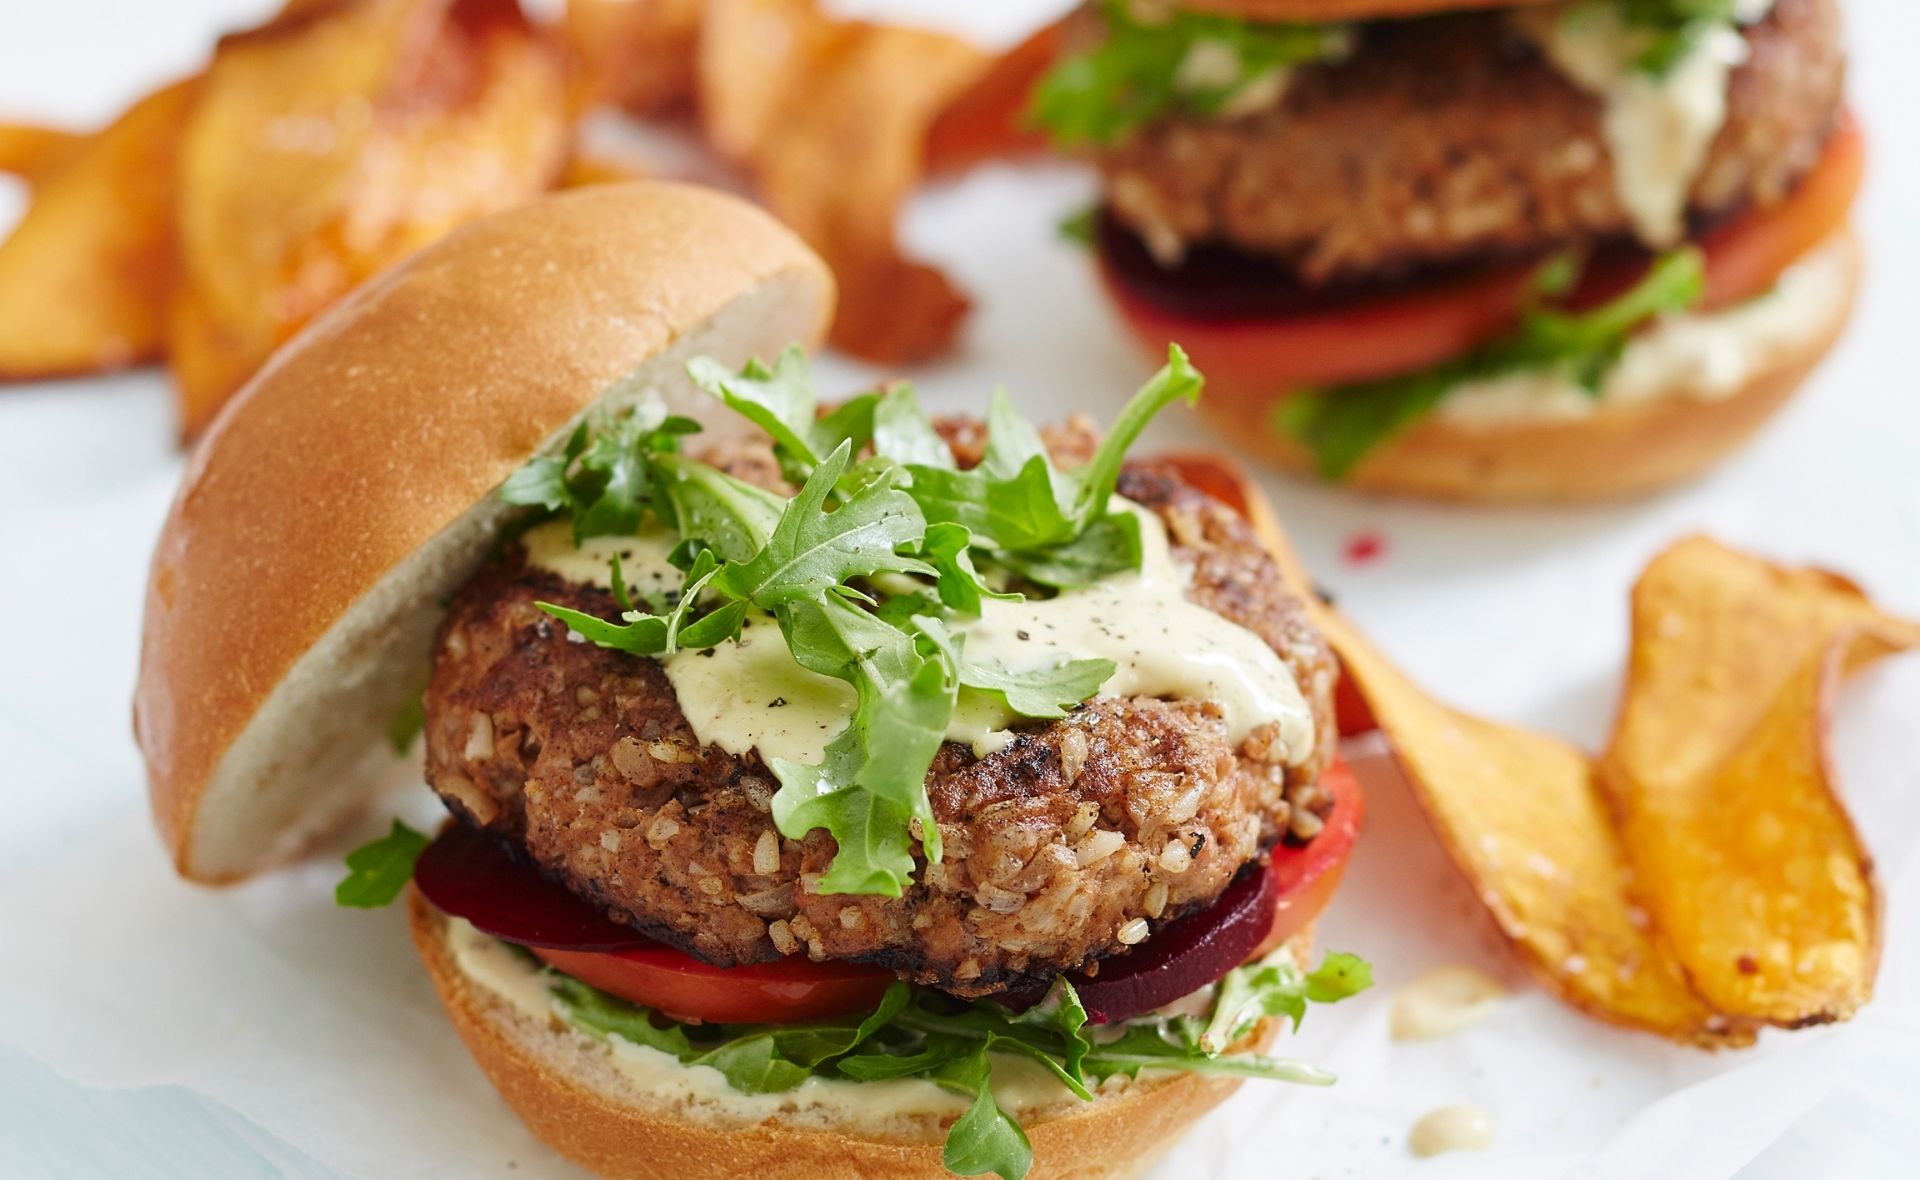 Beef and brown rice burgers